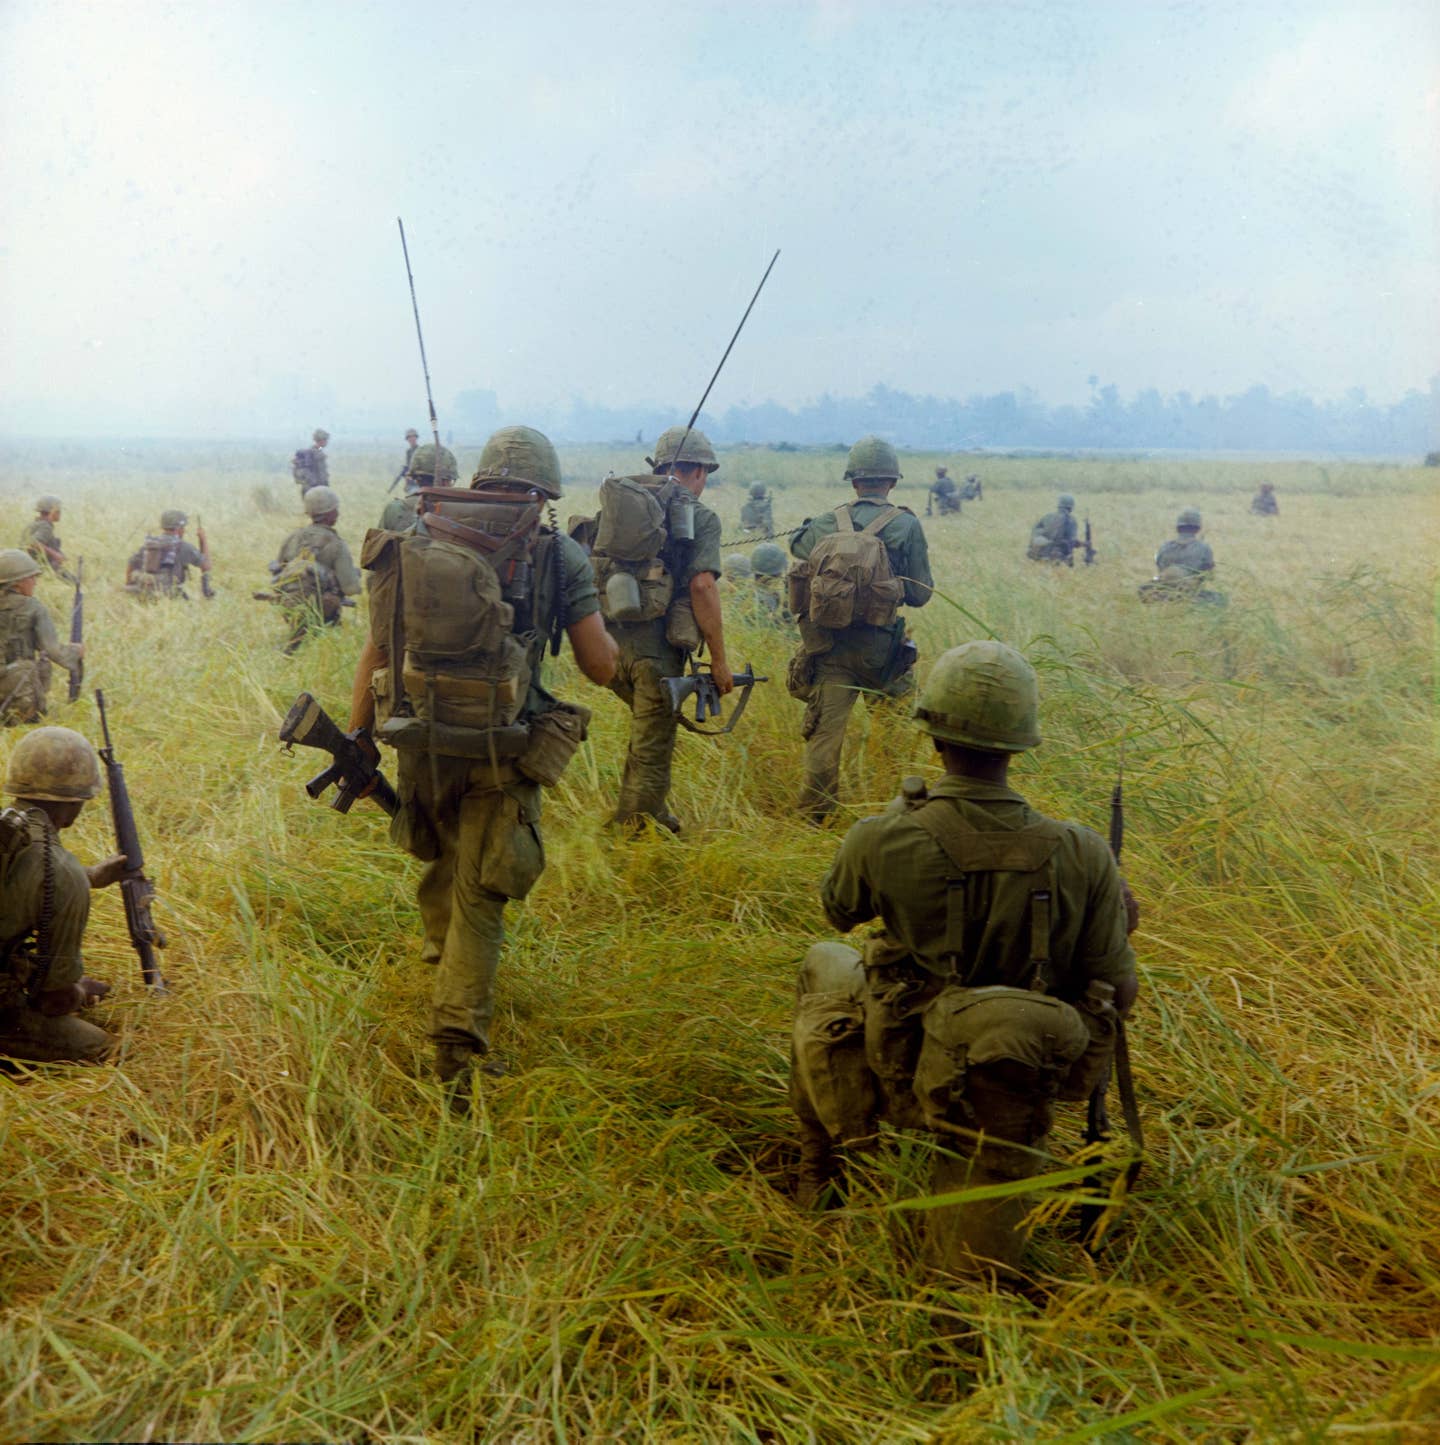 message-editor%2F1635539708956-photograph_of_troops_moving_across_a_rice_field_in_search_of_viet_cong.jpg